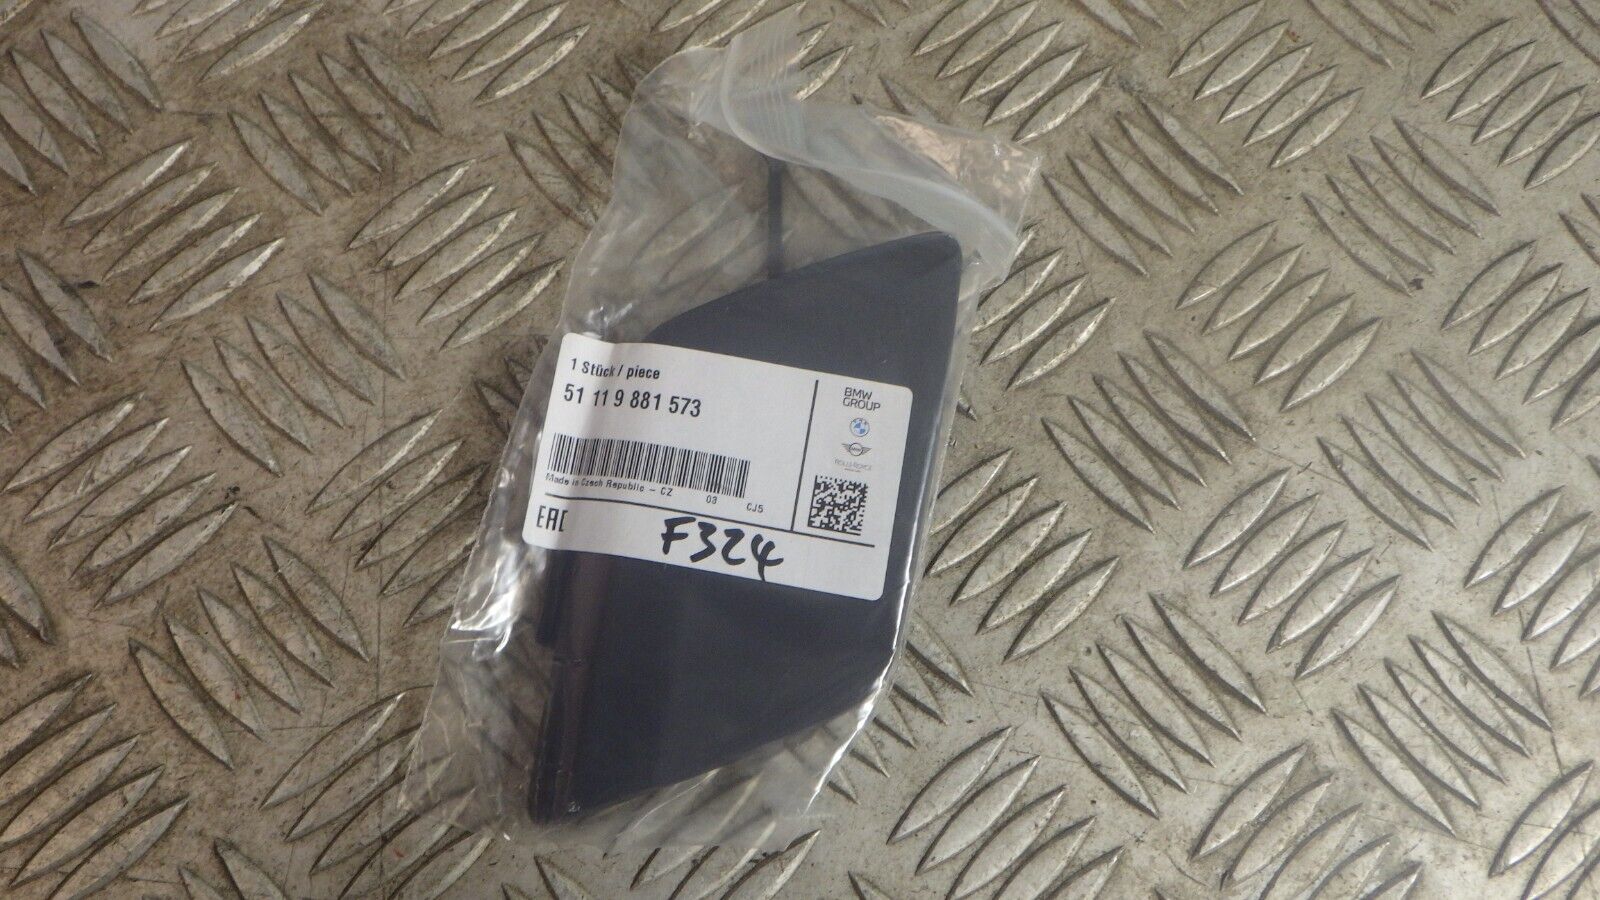 BMW F40 tow eye cover front M Sport 1 series genuine new 9881573